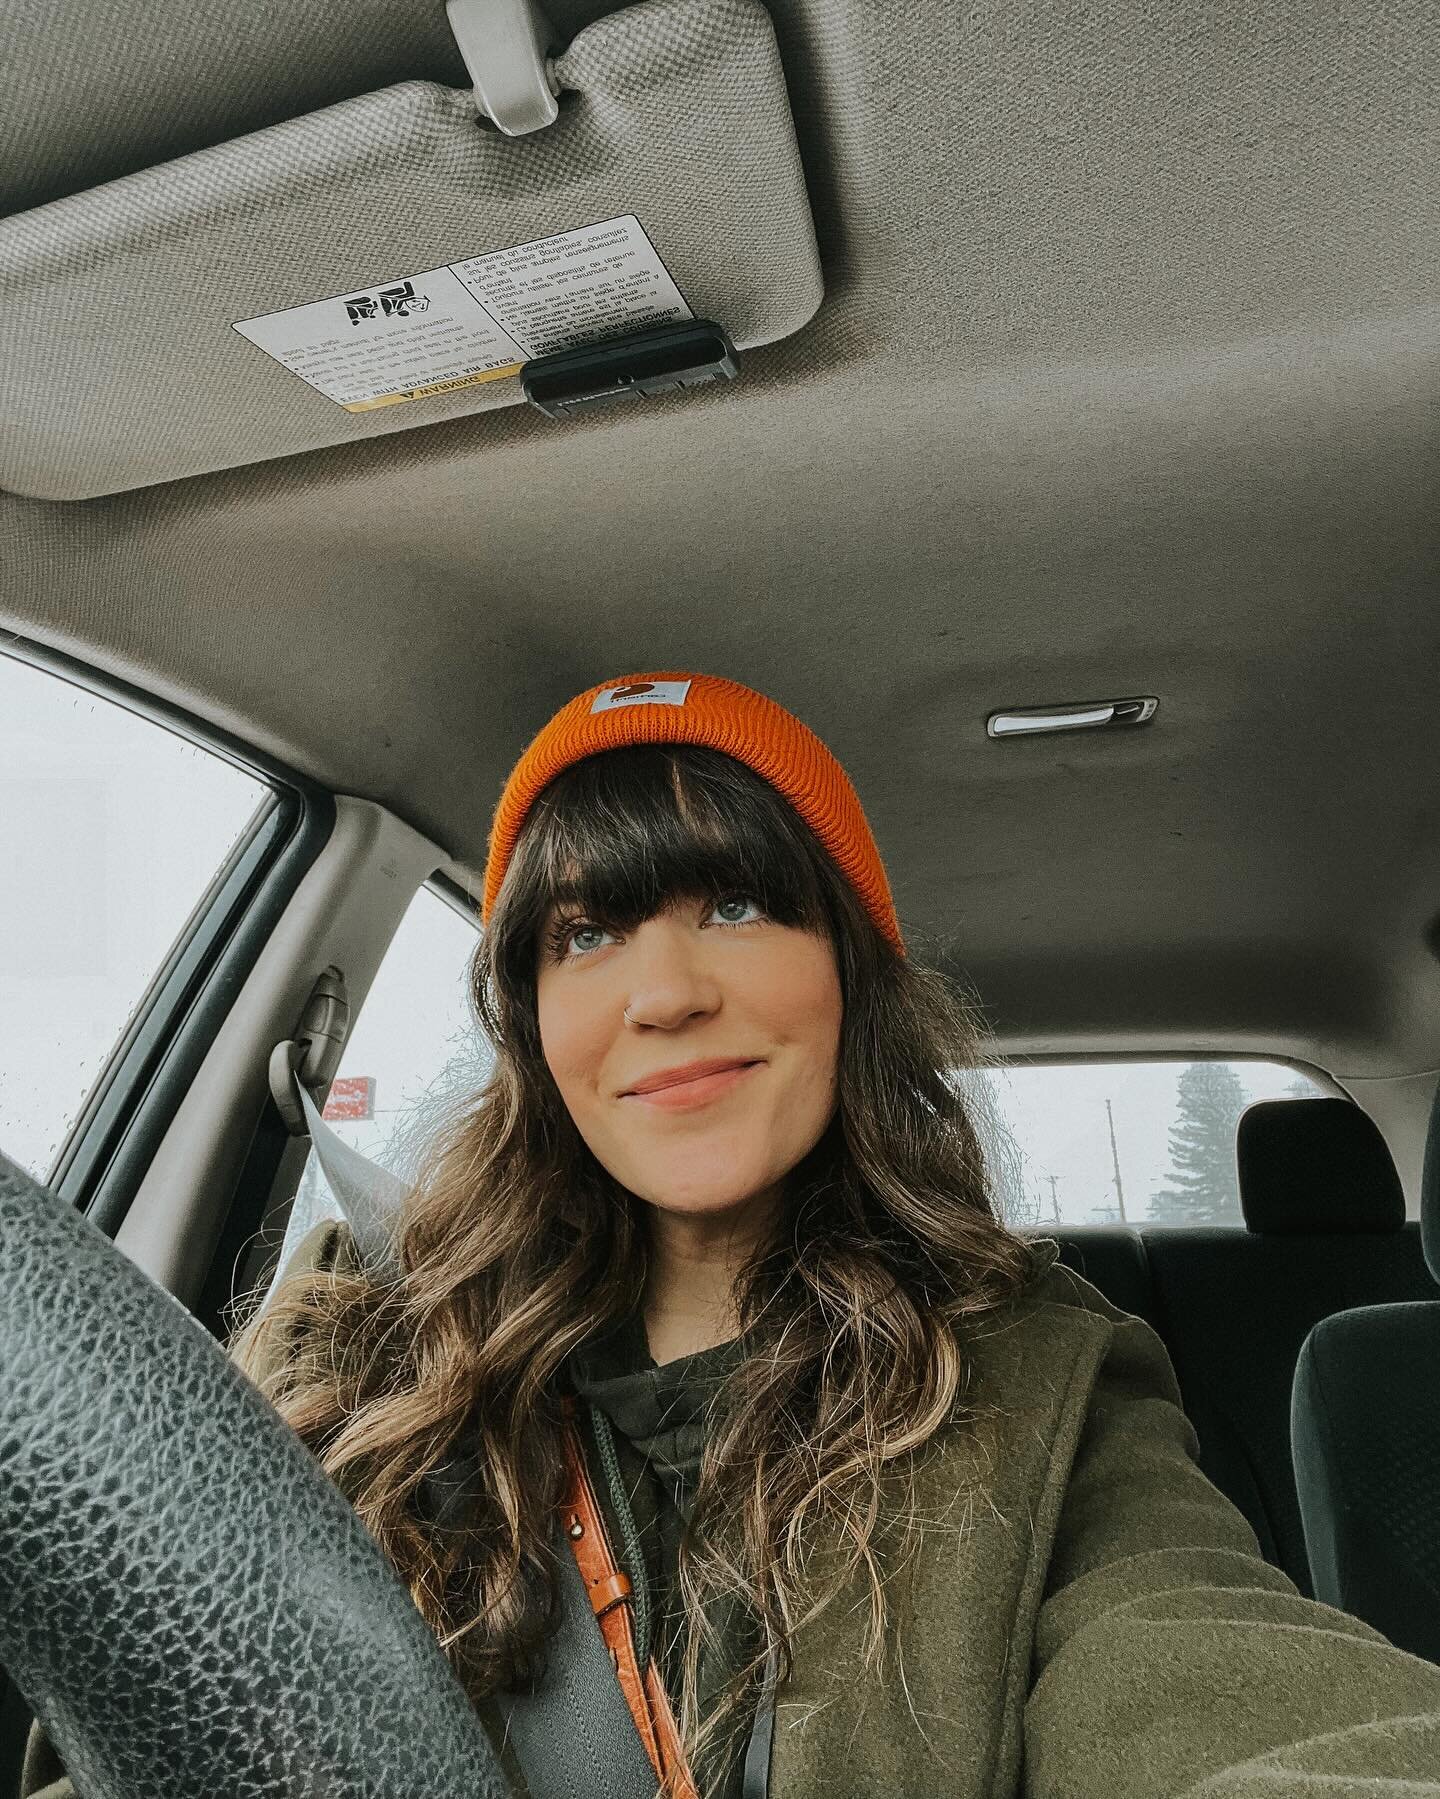 My car and I: partners in crime, seekers of the scenic routes, we have an unspoken pact&mdash;exploring every corner of the Upper Peninsula. (I asked AI to write me an IG caption for a car selfie. 😂)